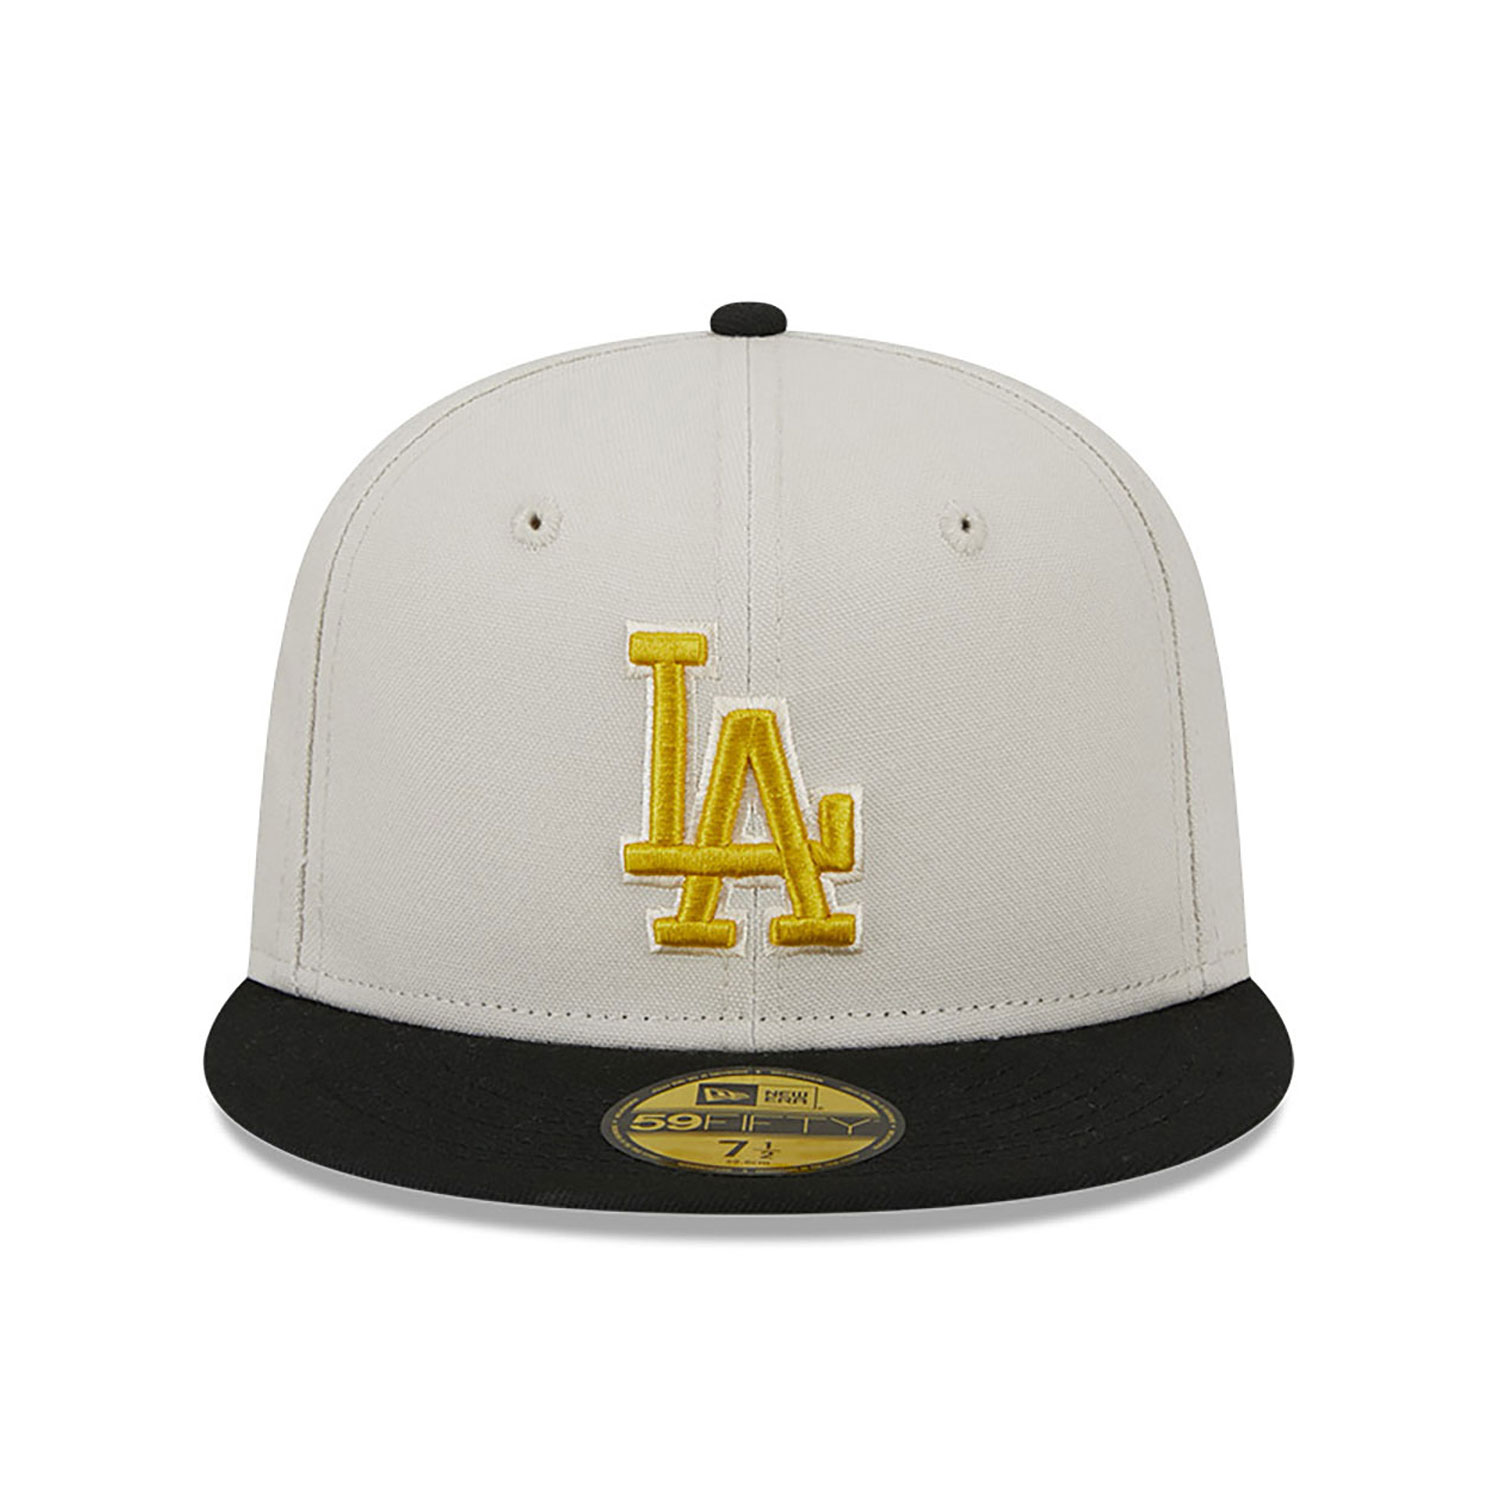 LA Dodgers Two-Tone Stone 59FIFTY Fitted Cap